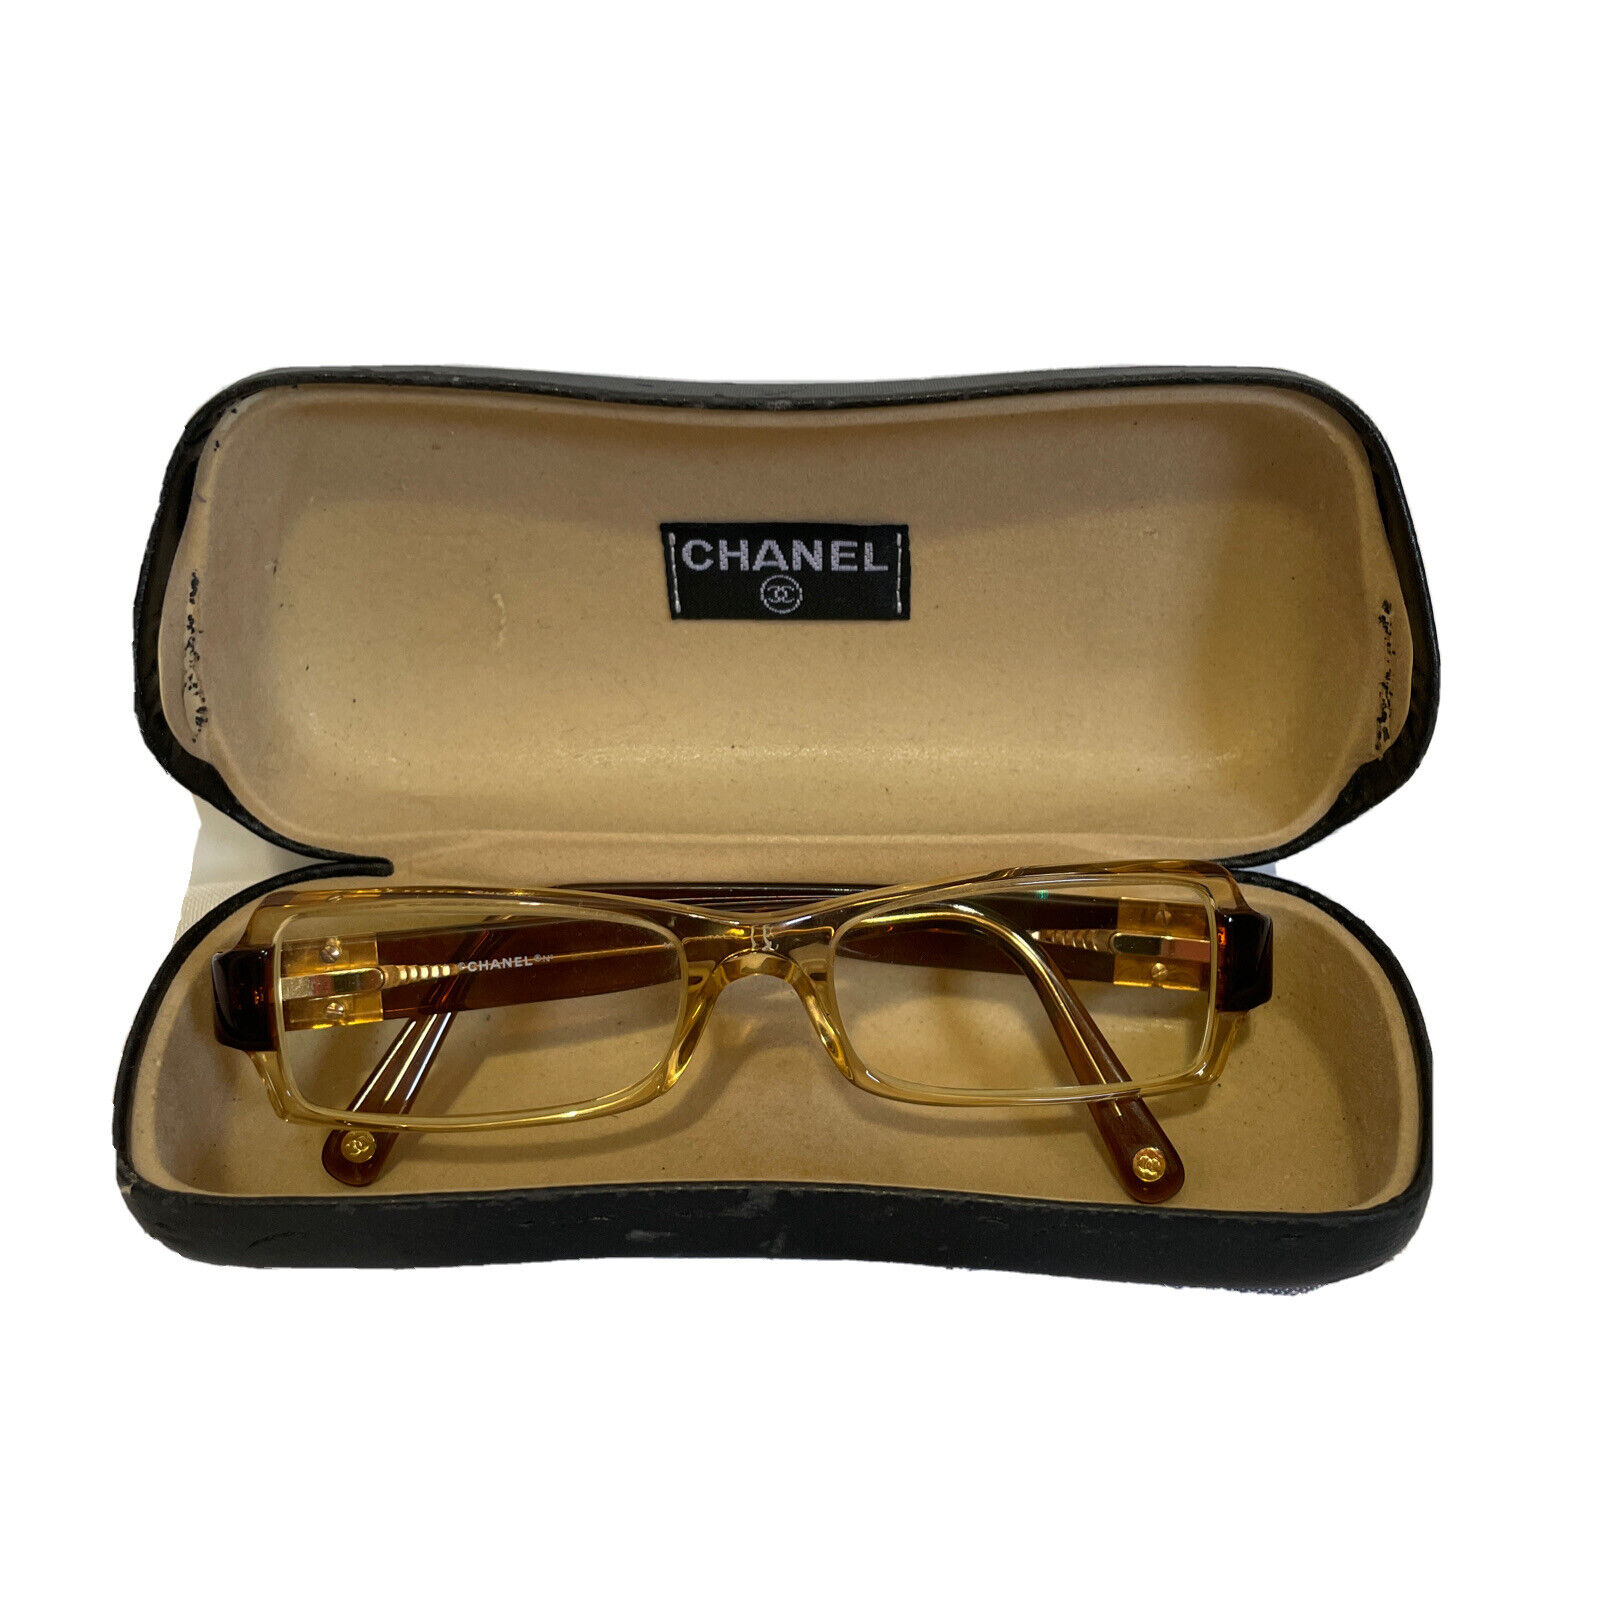 Rare Authentic Chanel 3064-B c.763 Clear/Tortoise 53mm Glasses Frames  RX-able